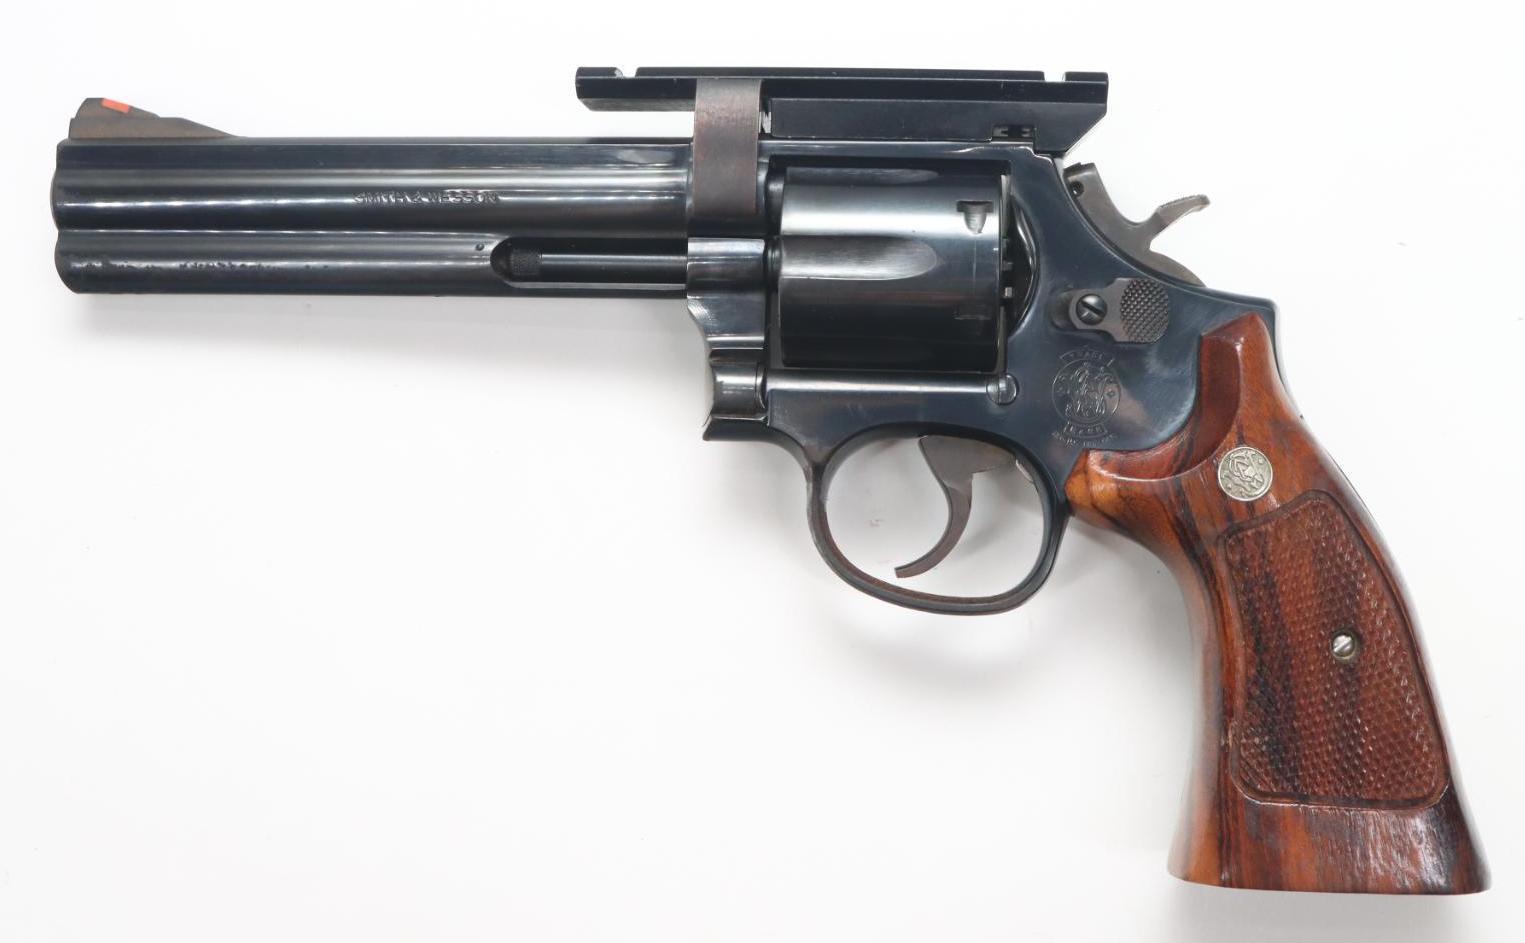 Smith & Wesson 586-2 Double Action Revolver